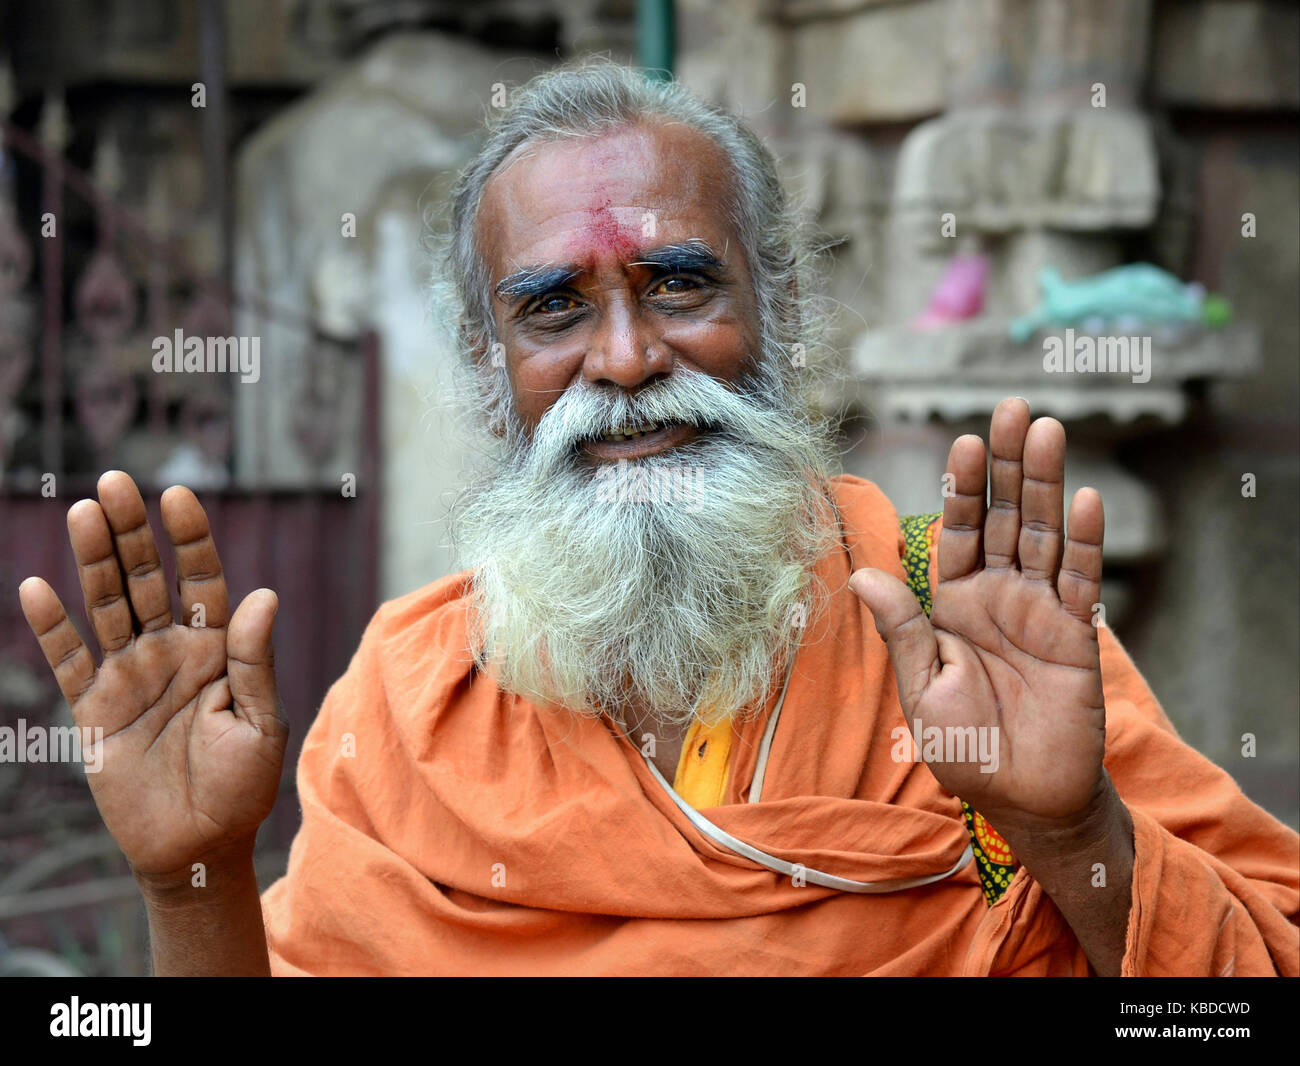 Old Shaivite sadhu (Hindu holy man who worships Shiva) with white beard raising both his hands to give a blessing and looking into the camera Stock Photo